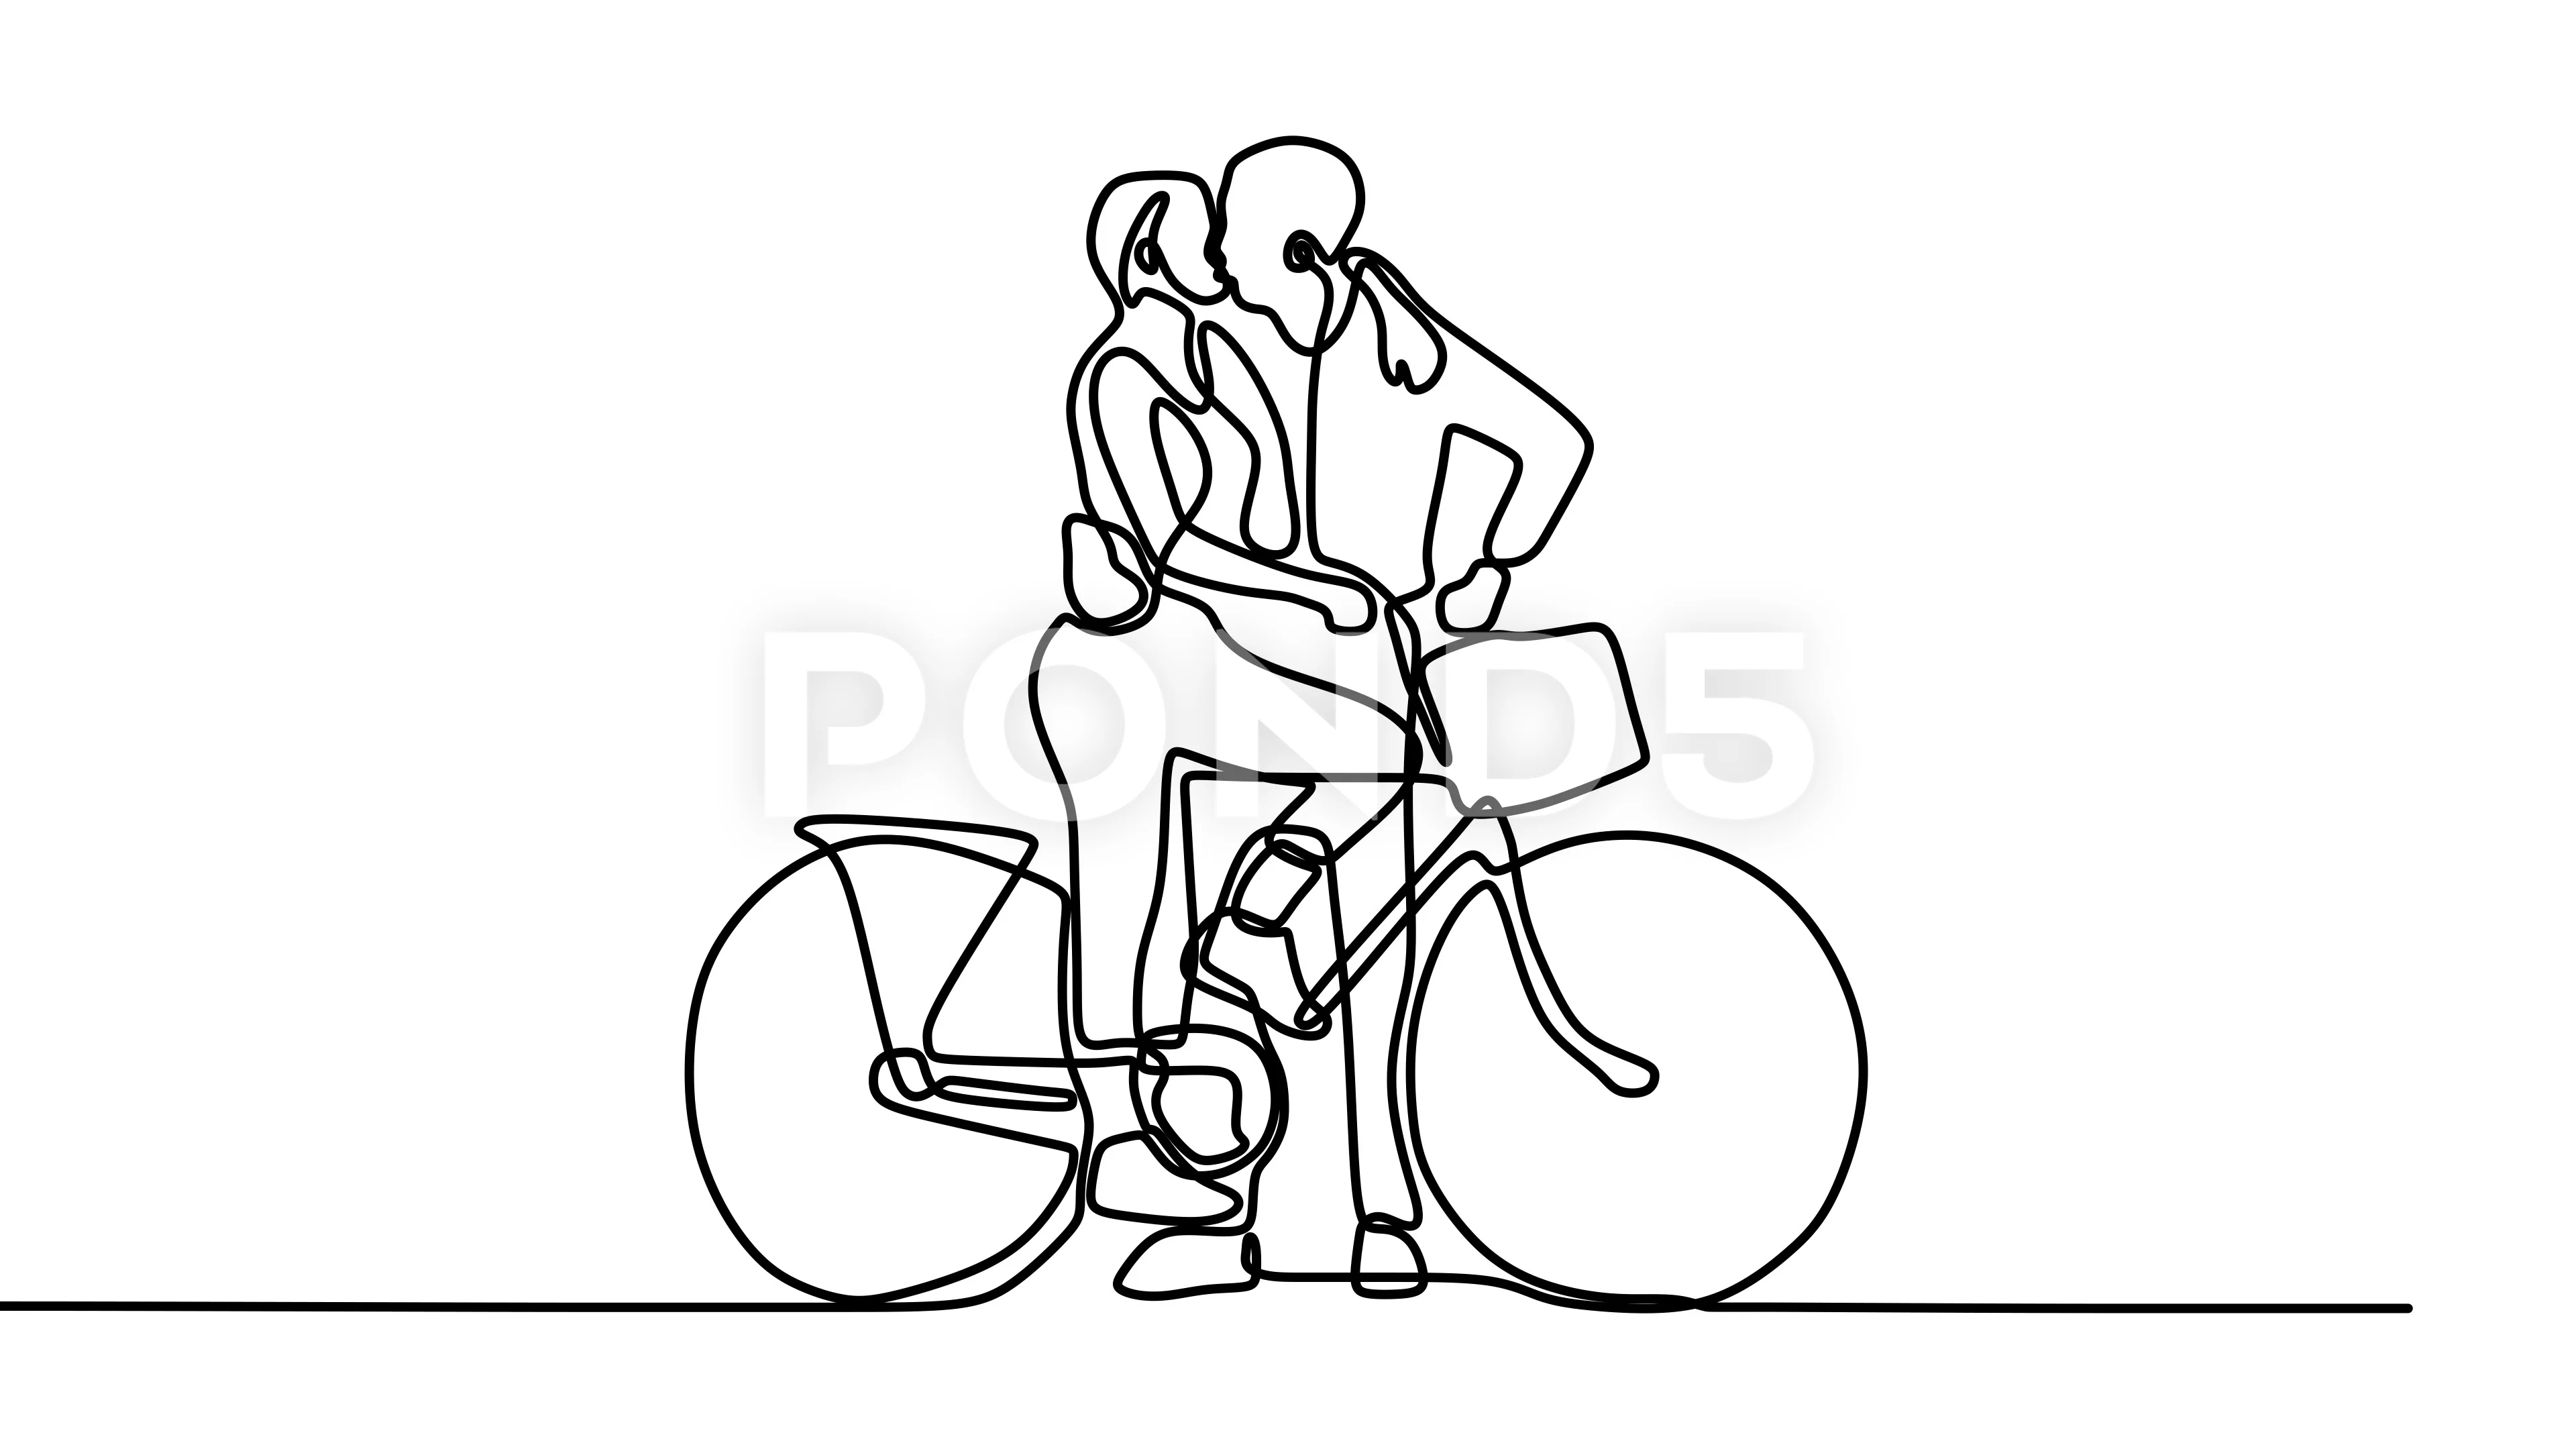 Premium Vector | Graphic flat design drawing of loving married couple man  and woman sitting on bicycle and kissing romantic human relation love story  newlywed family in honeymoon cartoon style vector illustration